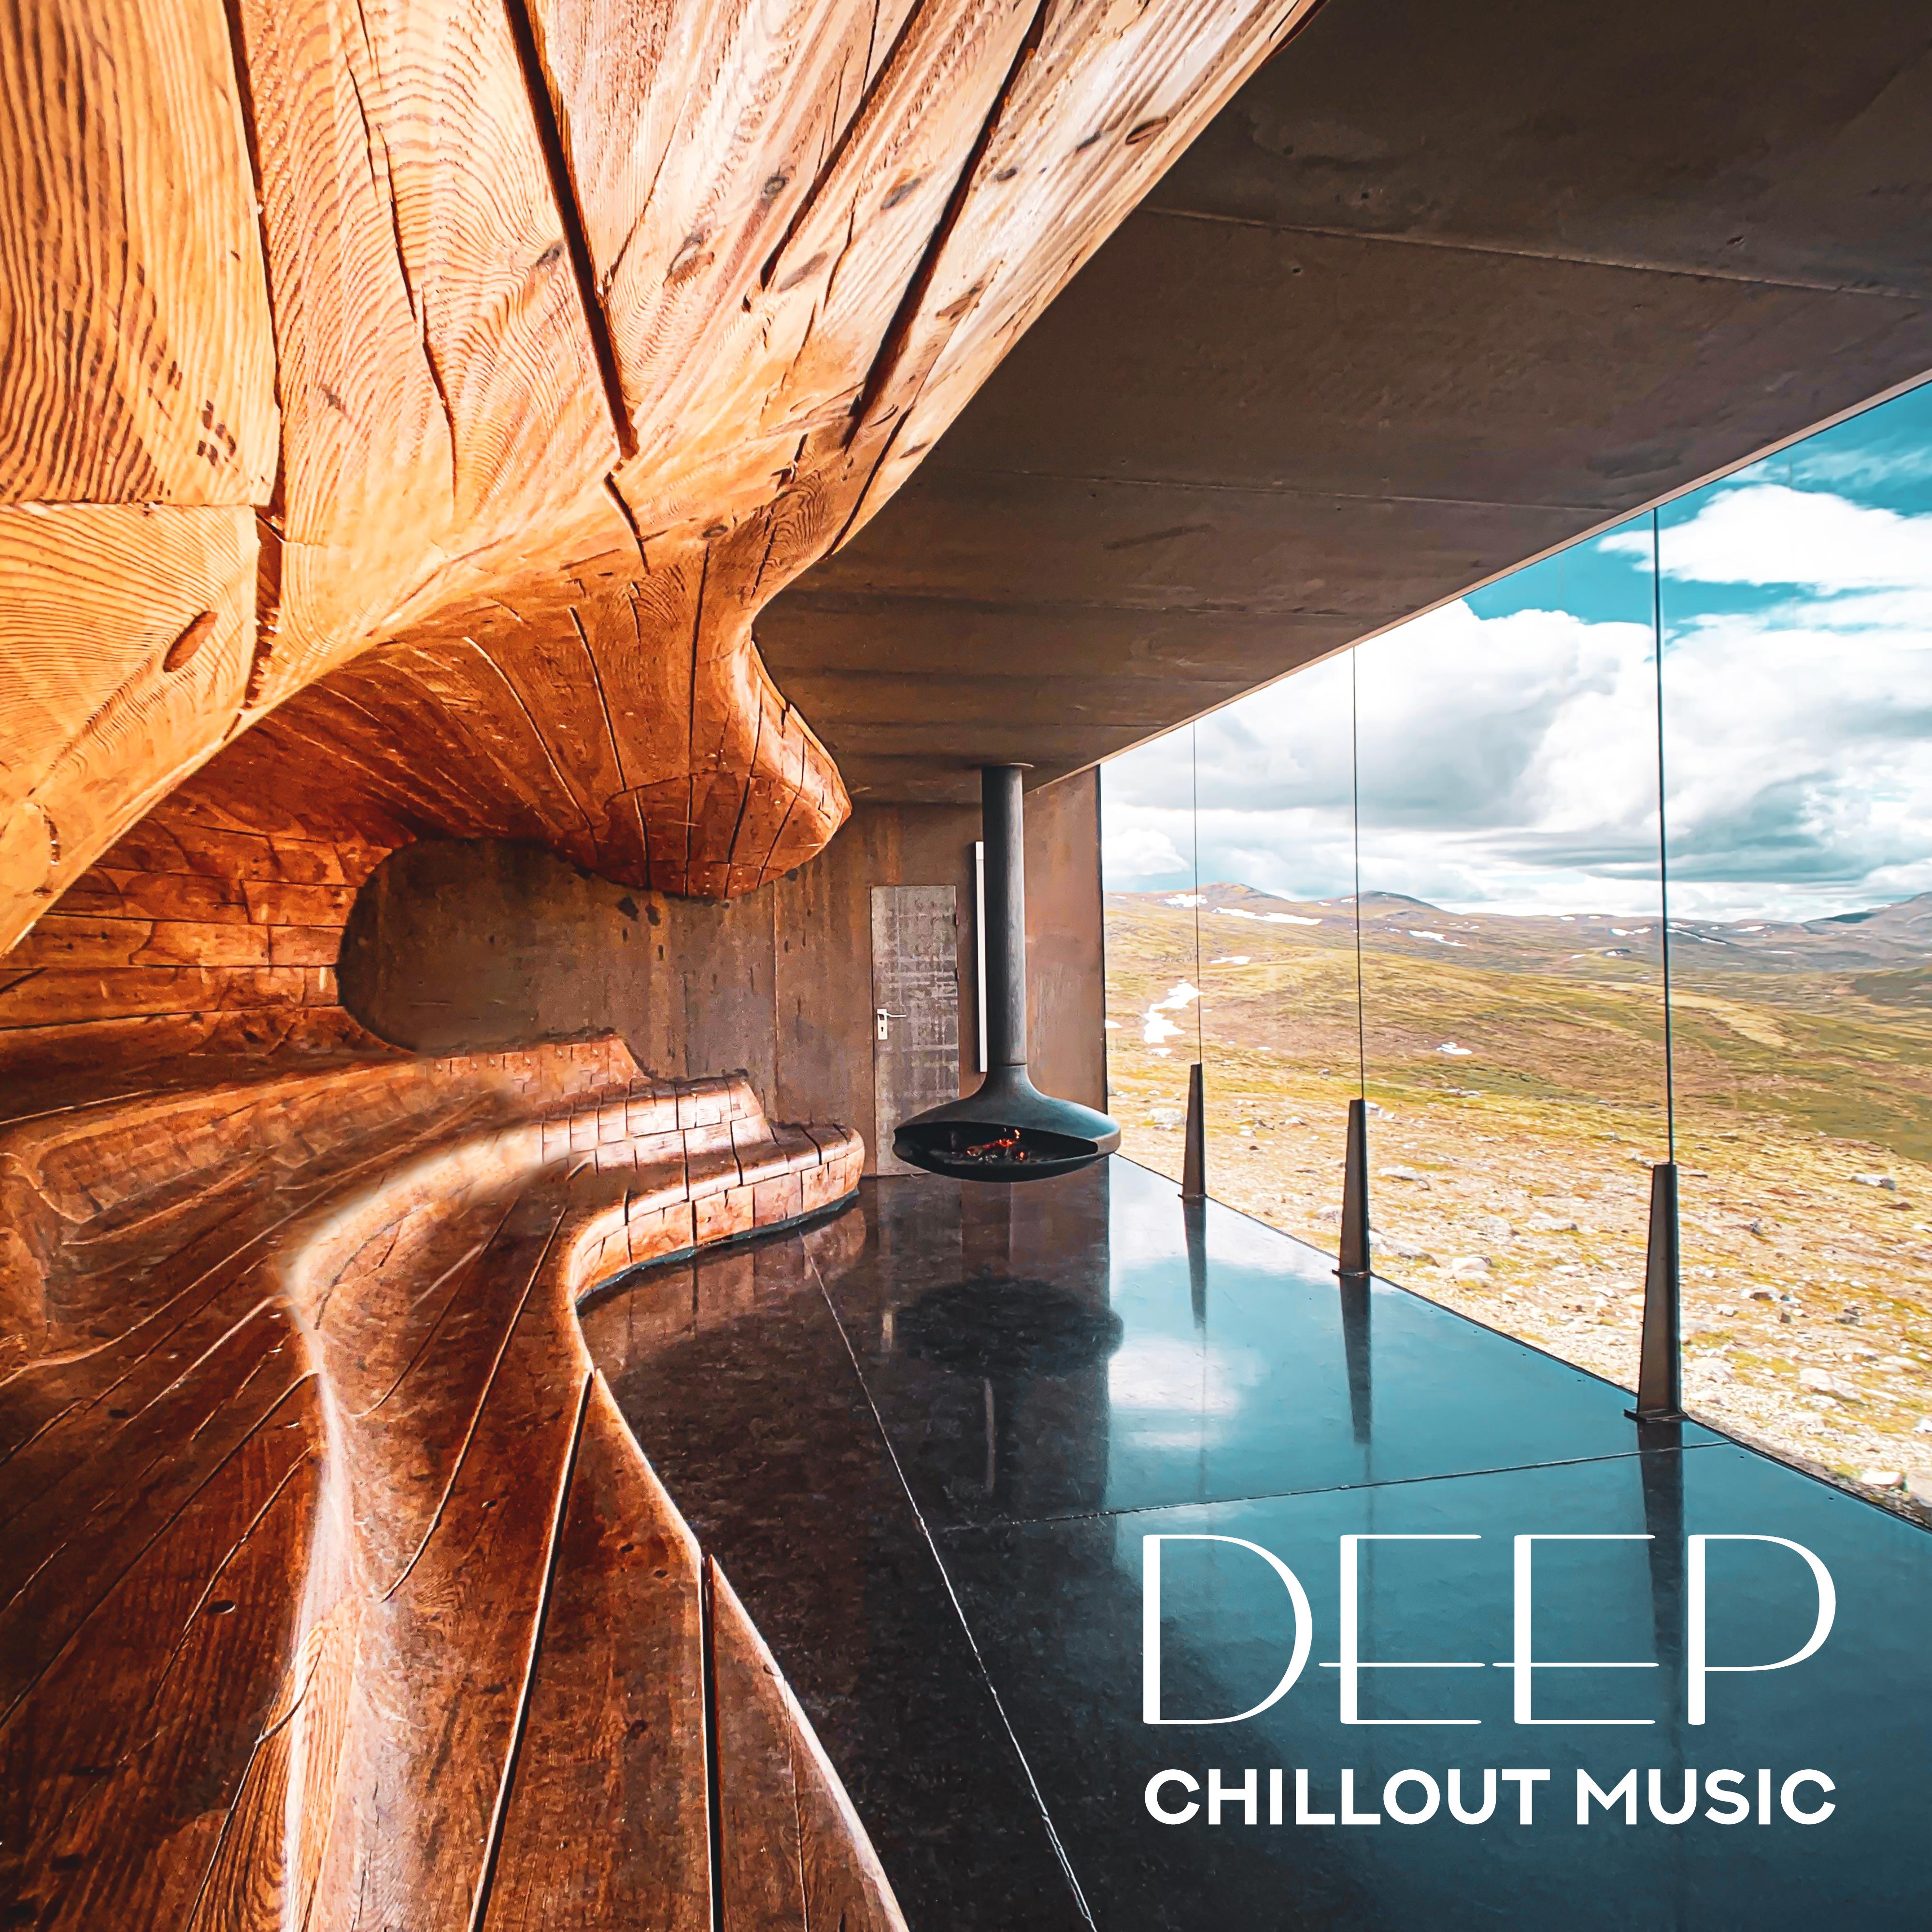 Deep Chillout Music - Relaxing Sounds, Chill Music, Deep Rest, Pure Leisure, Stress Relieving Music